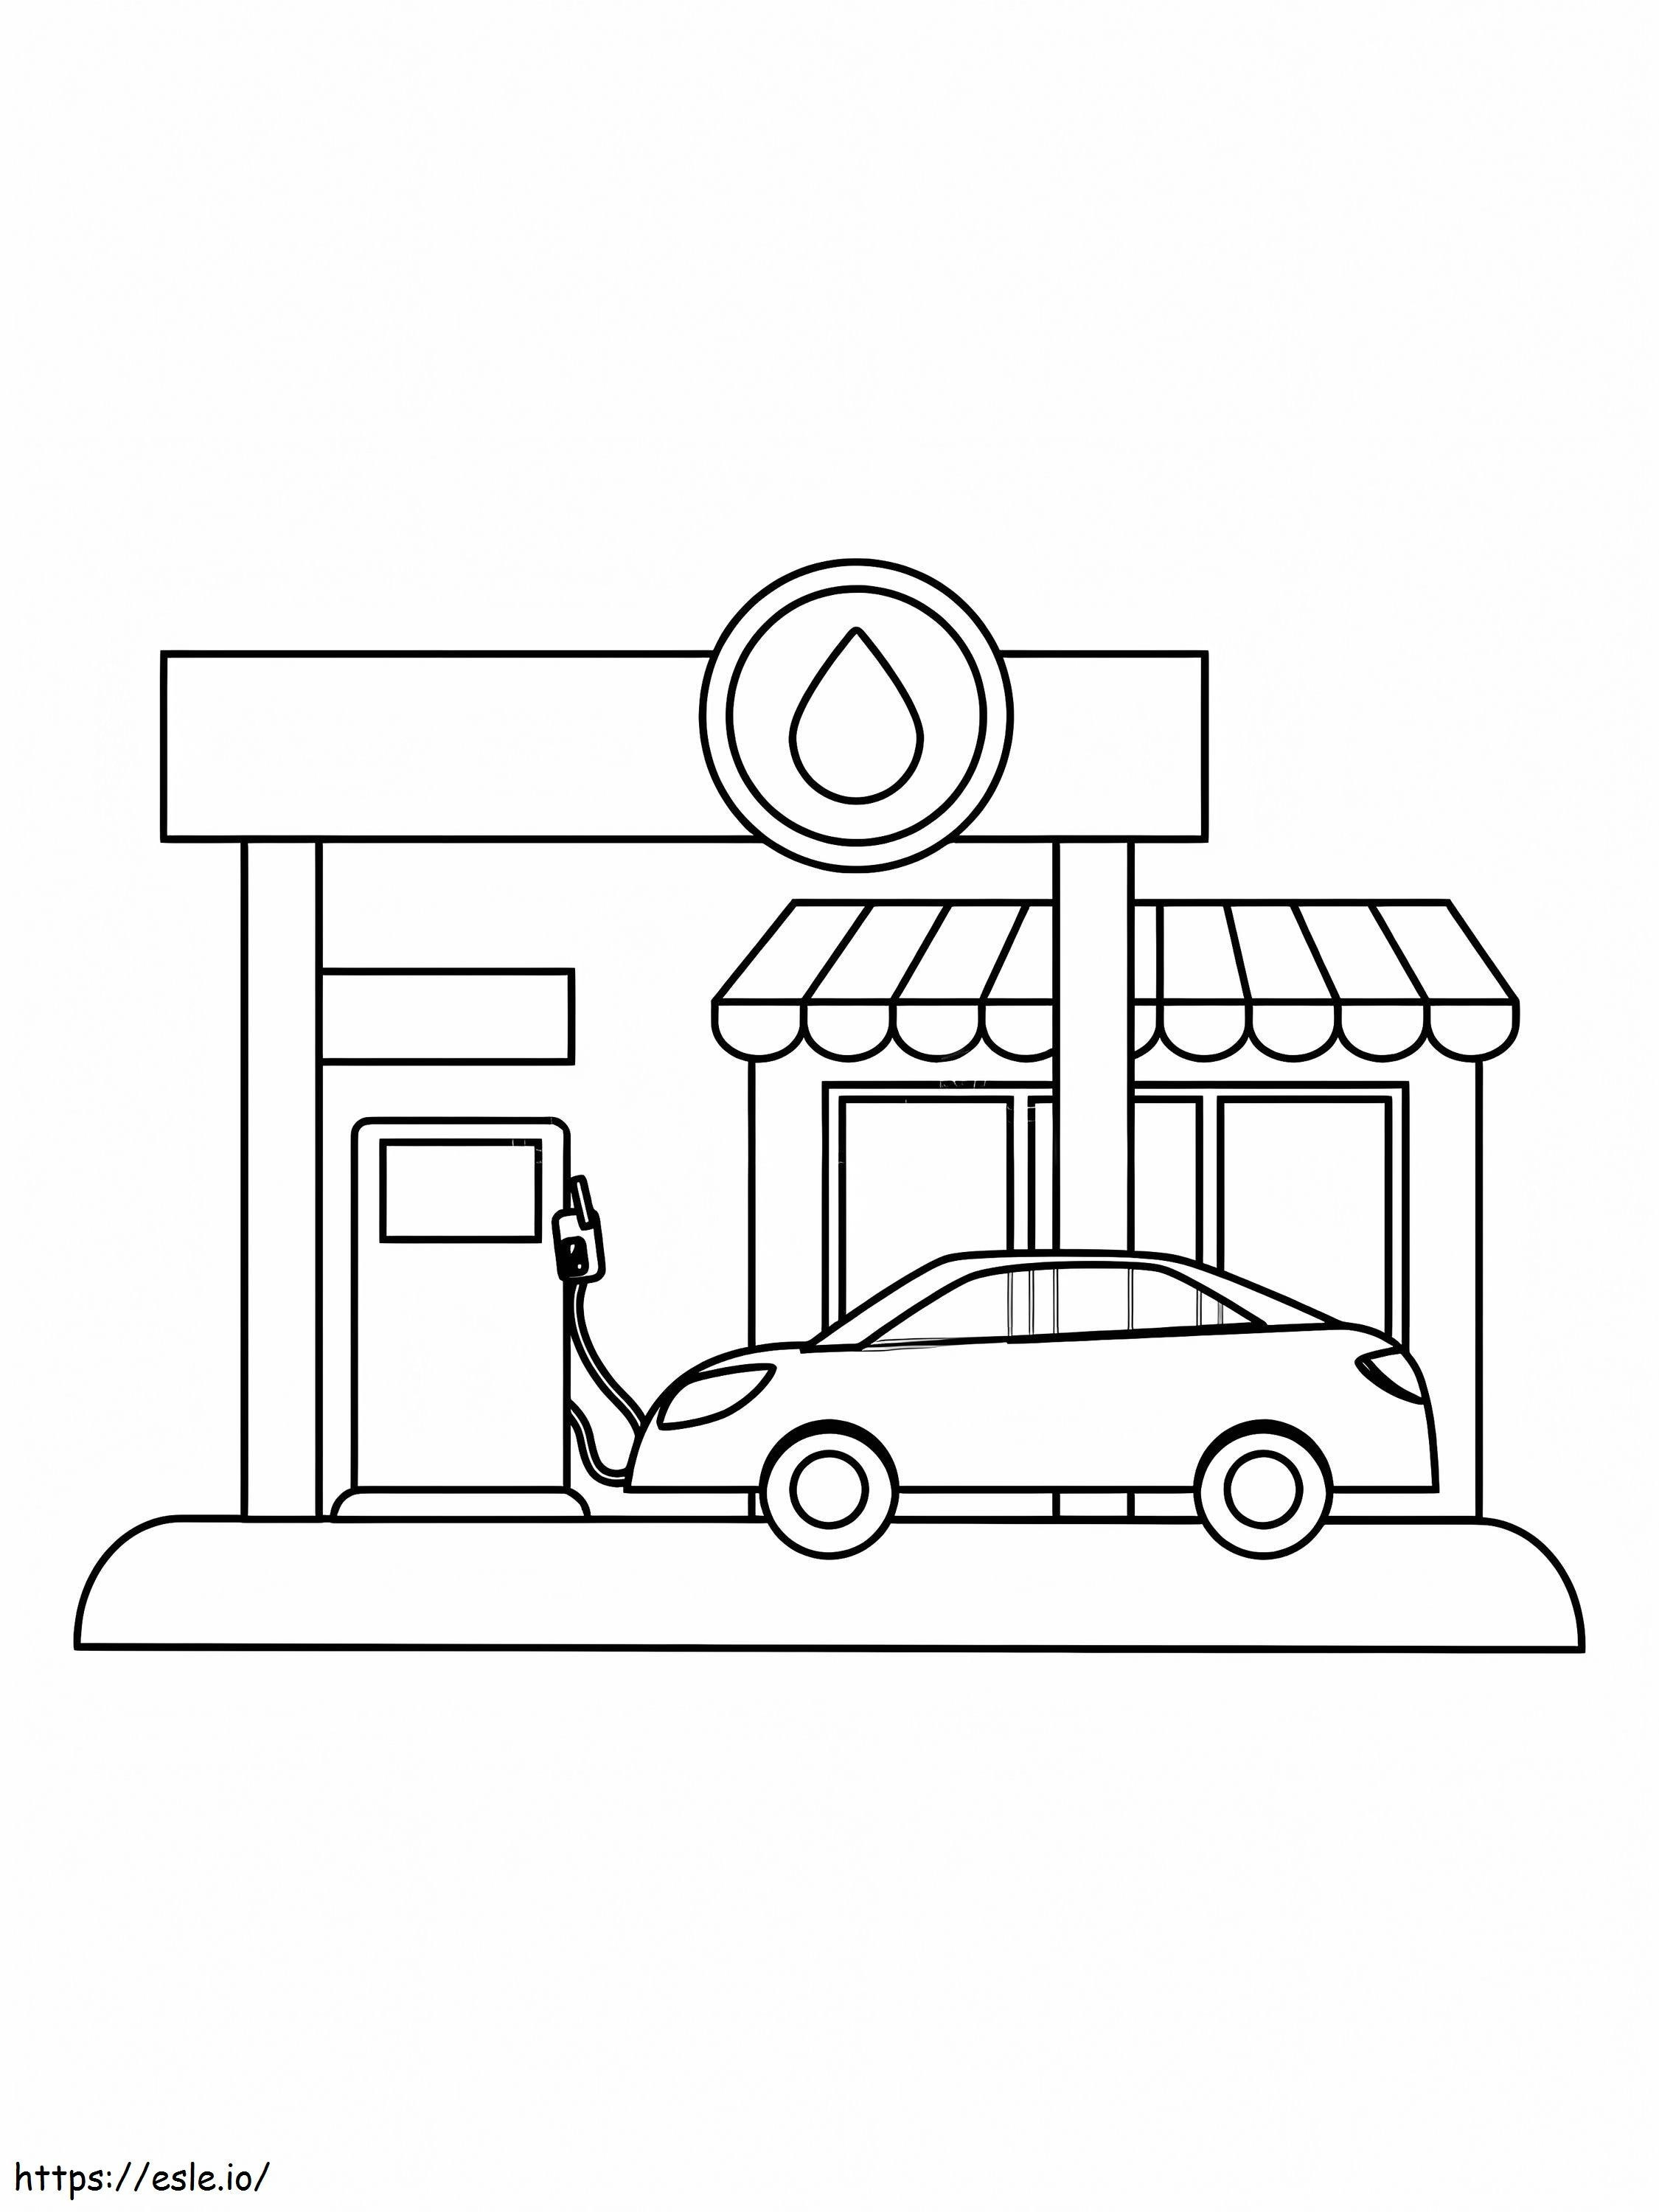 Easy gas statn coloring page